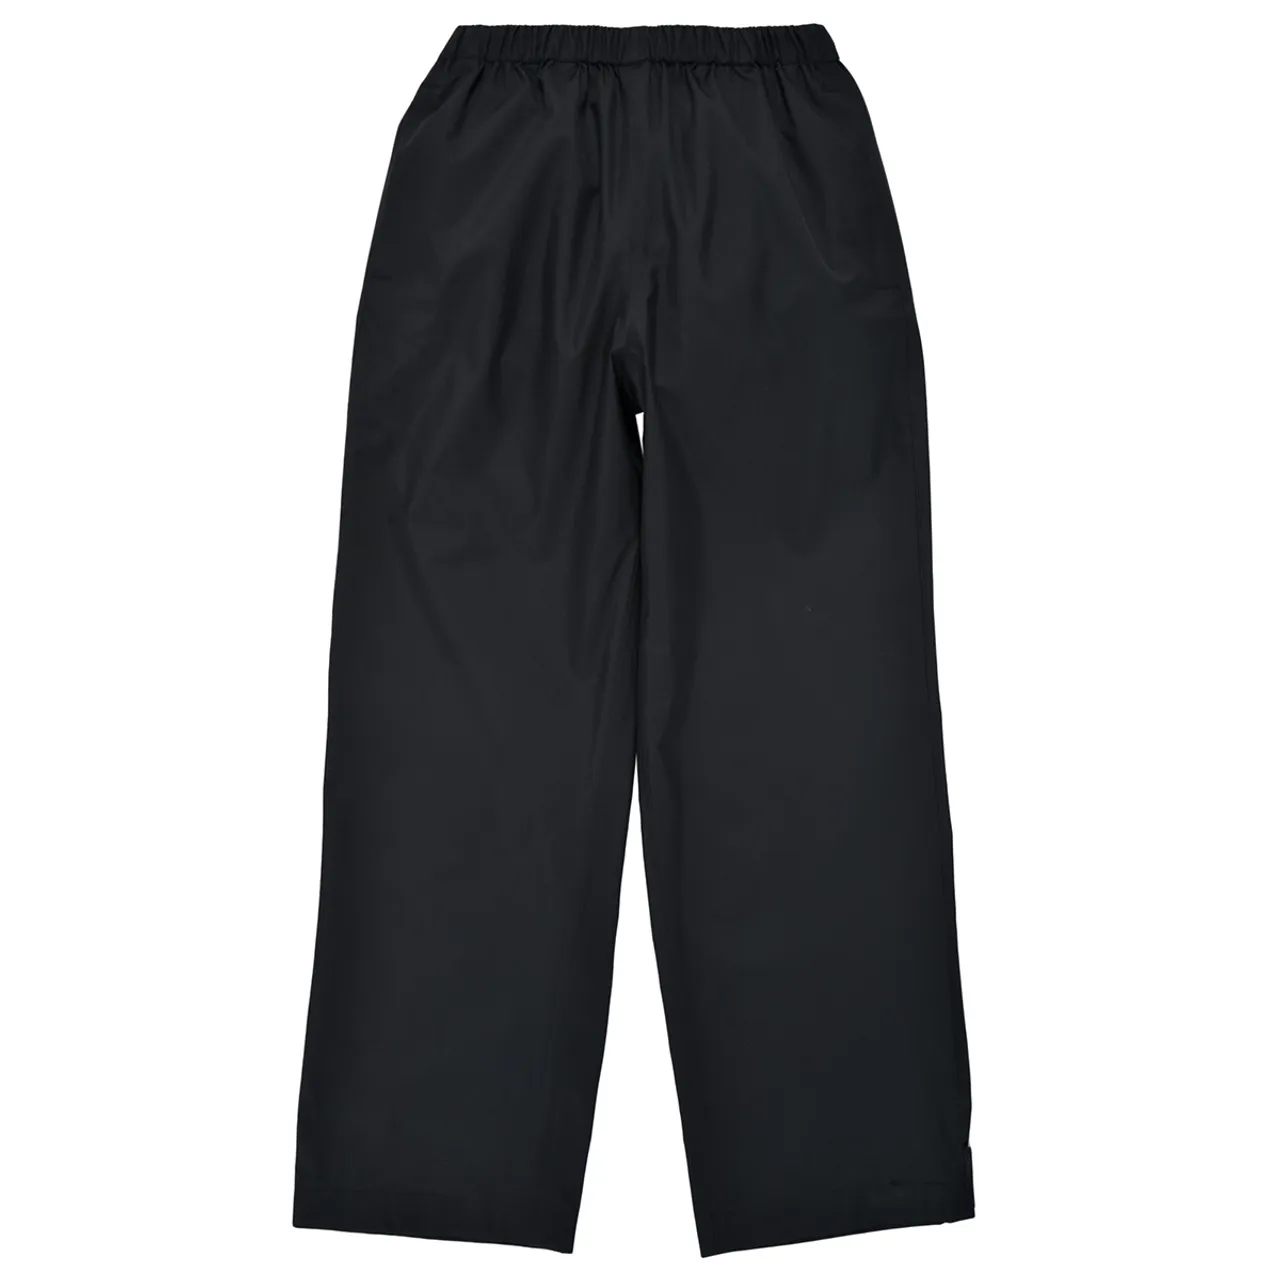 Columbia  TRAIL ADVENTURE PANT  boys's Children's trousers in Black